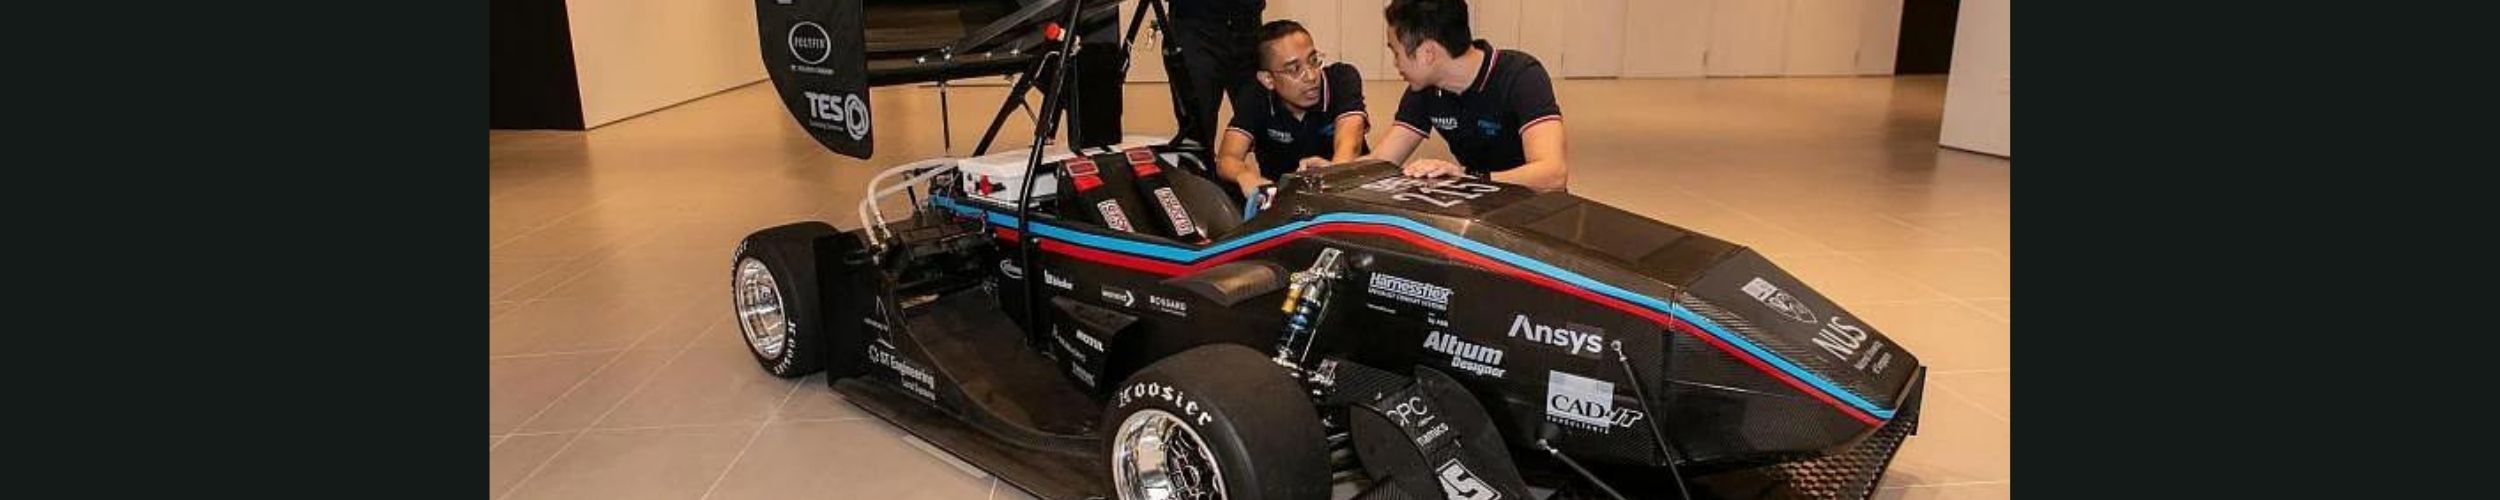 TES-Sponsored Electric Race Car Points to Fast-Moving Momentum for EVs